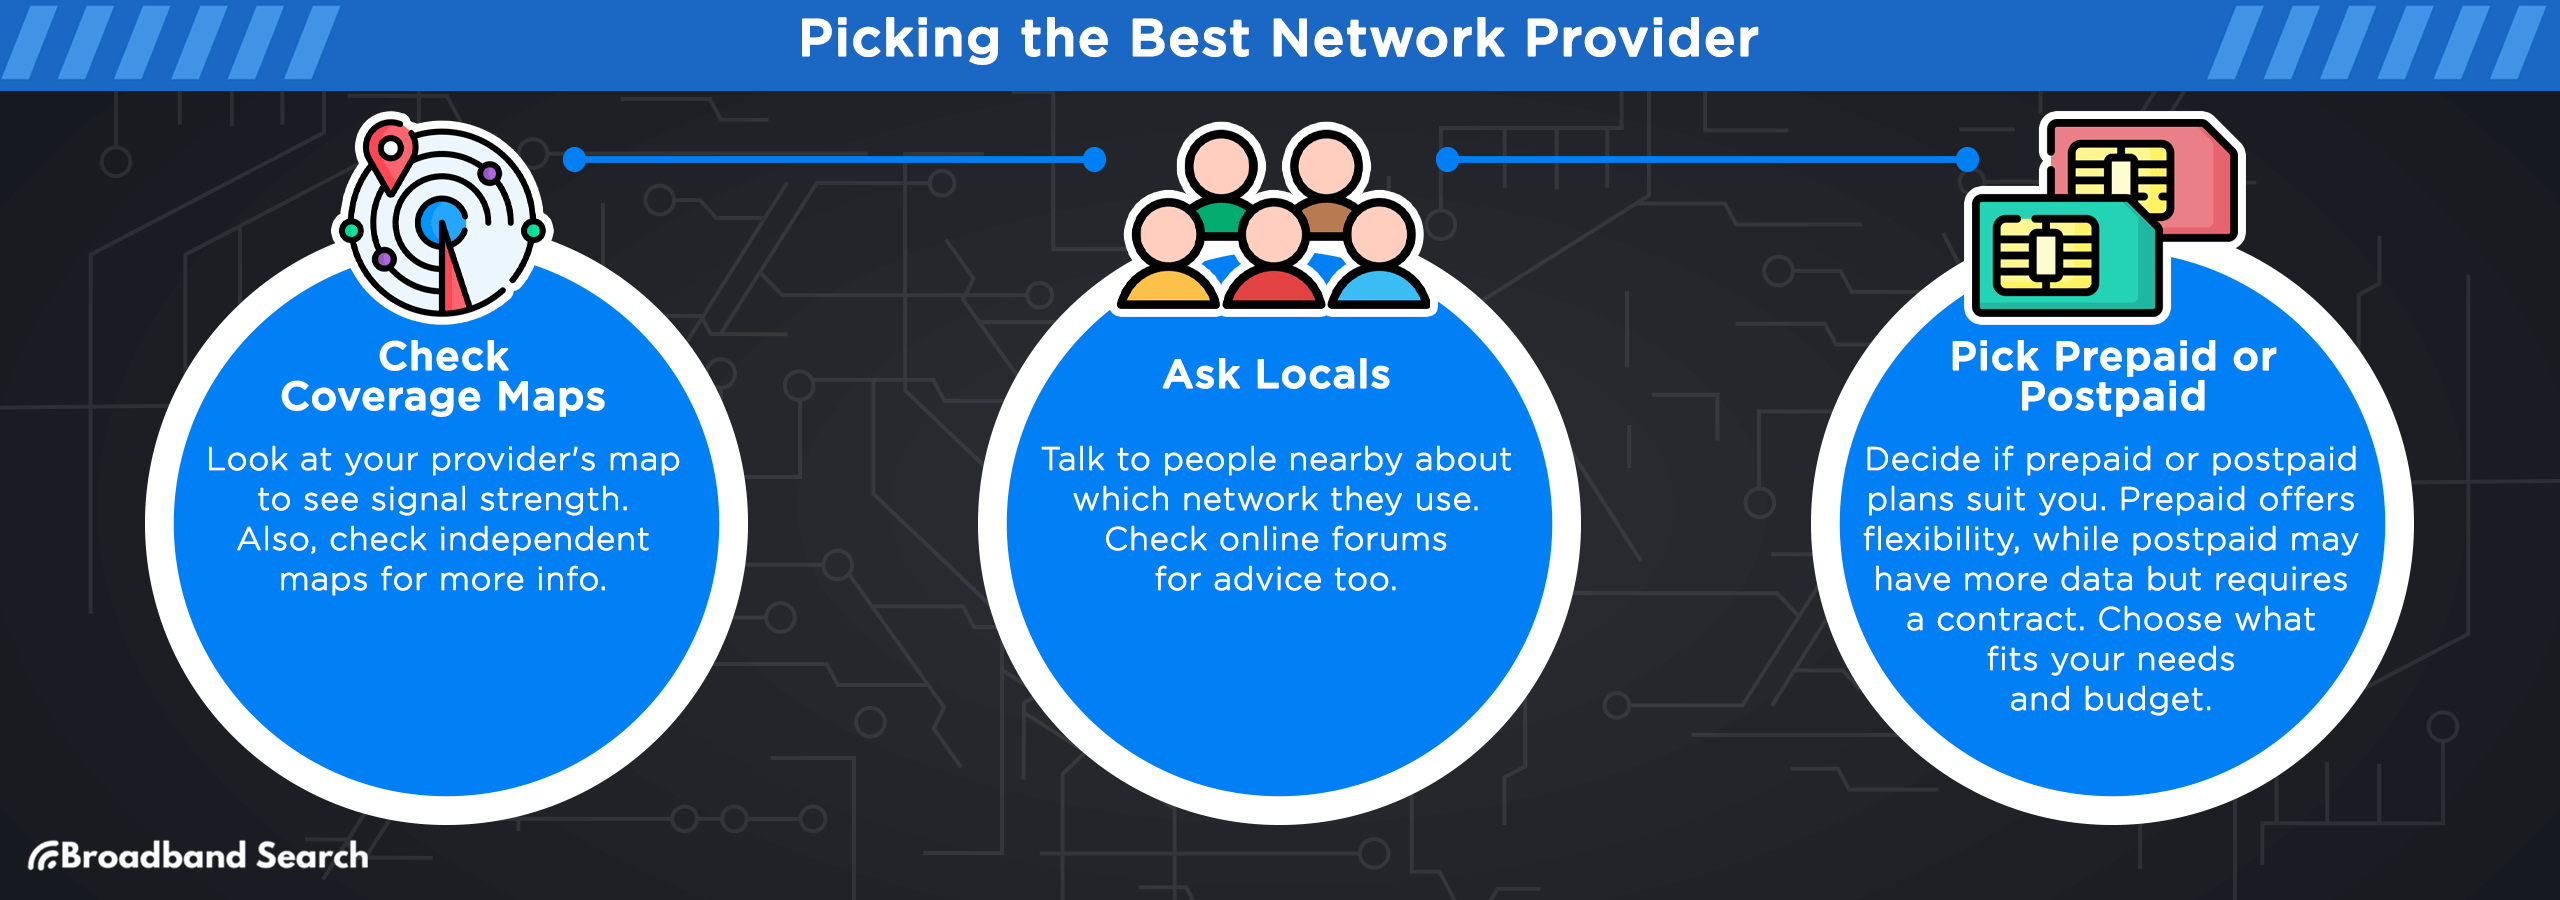 Picking the best network provider